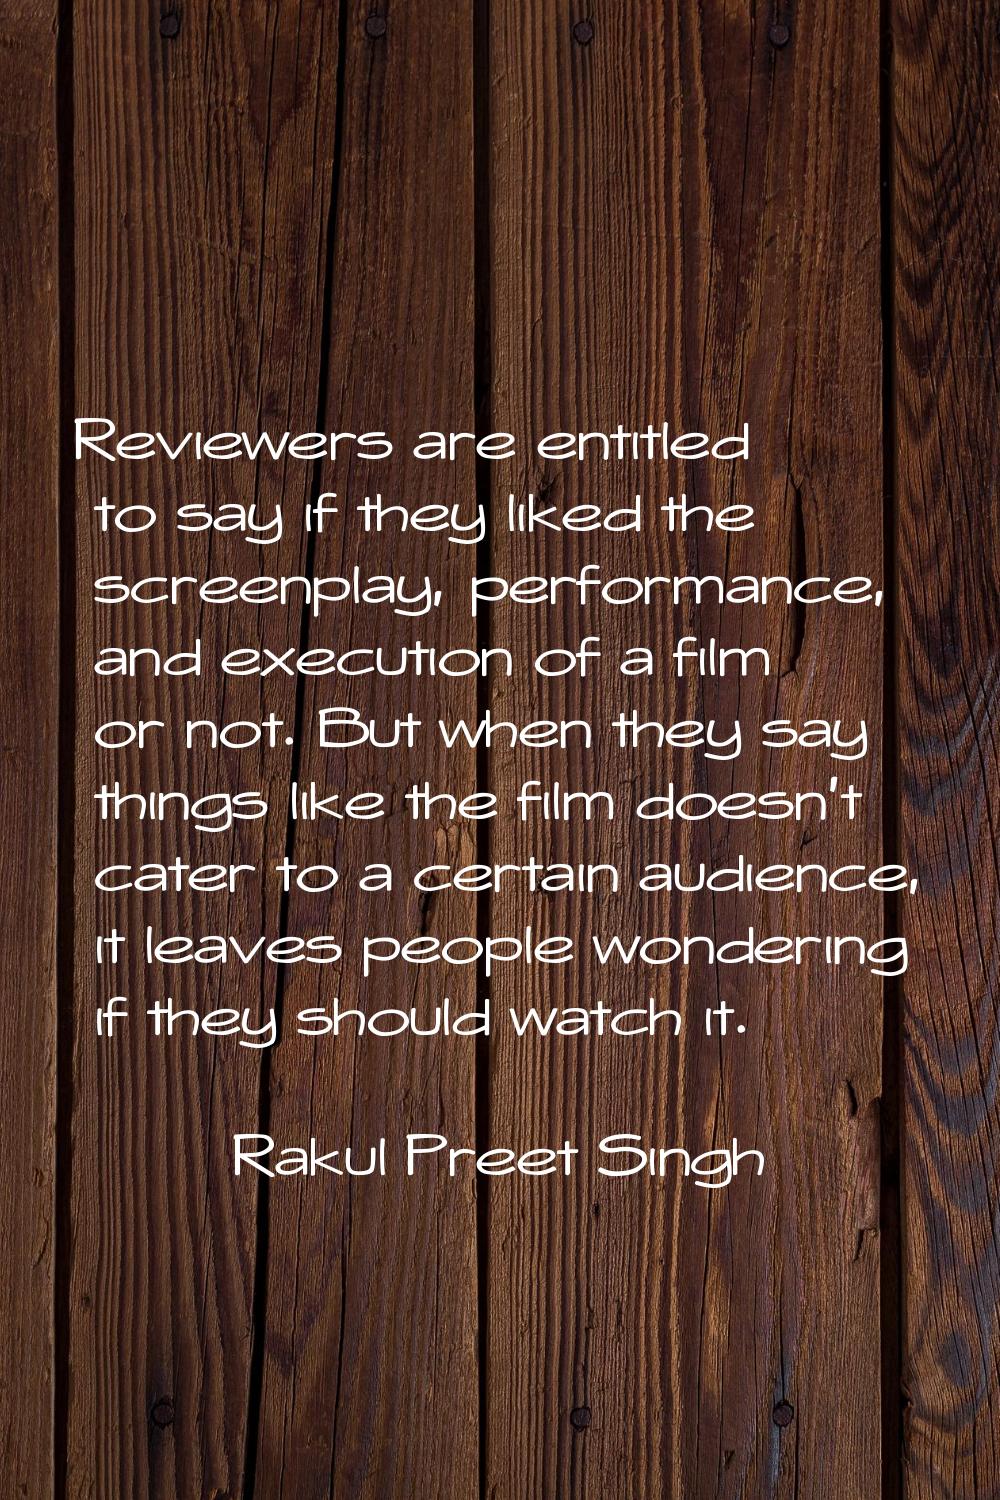 Reviewers are entitled to say if they liked the screenplay, performance, and execution of a film or